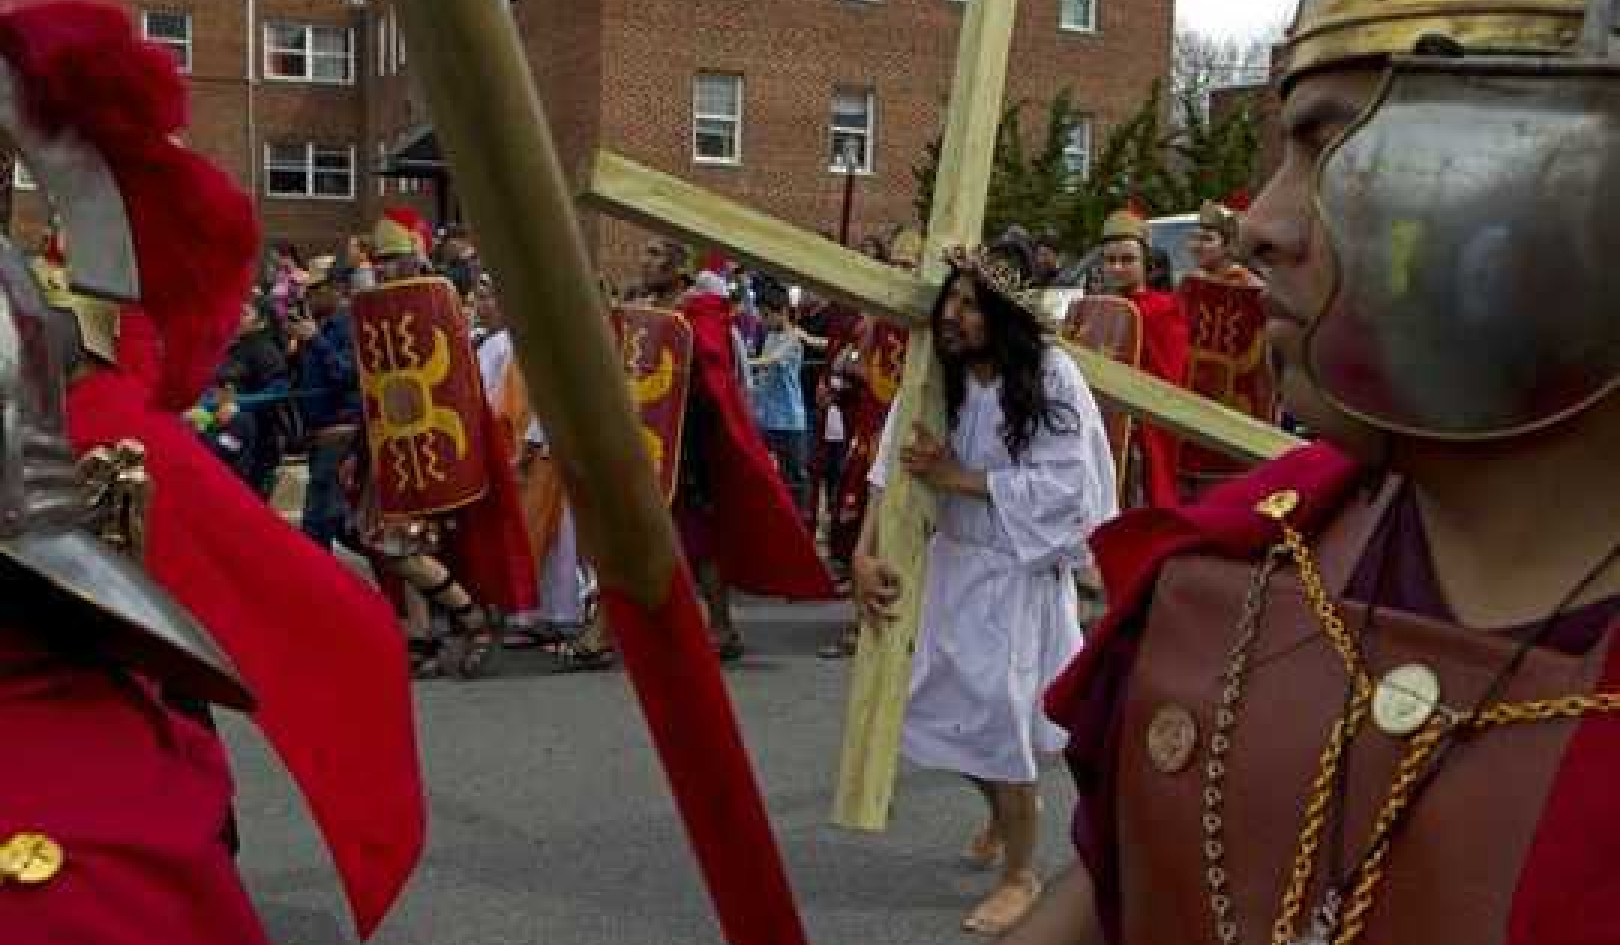 Why Good Friday Was Dangerous For Jews In The Middle Ages And How That Changed